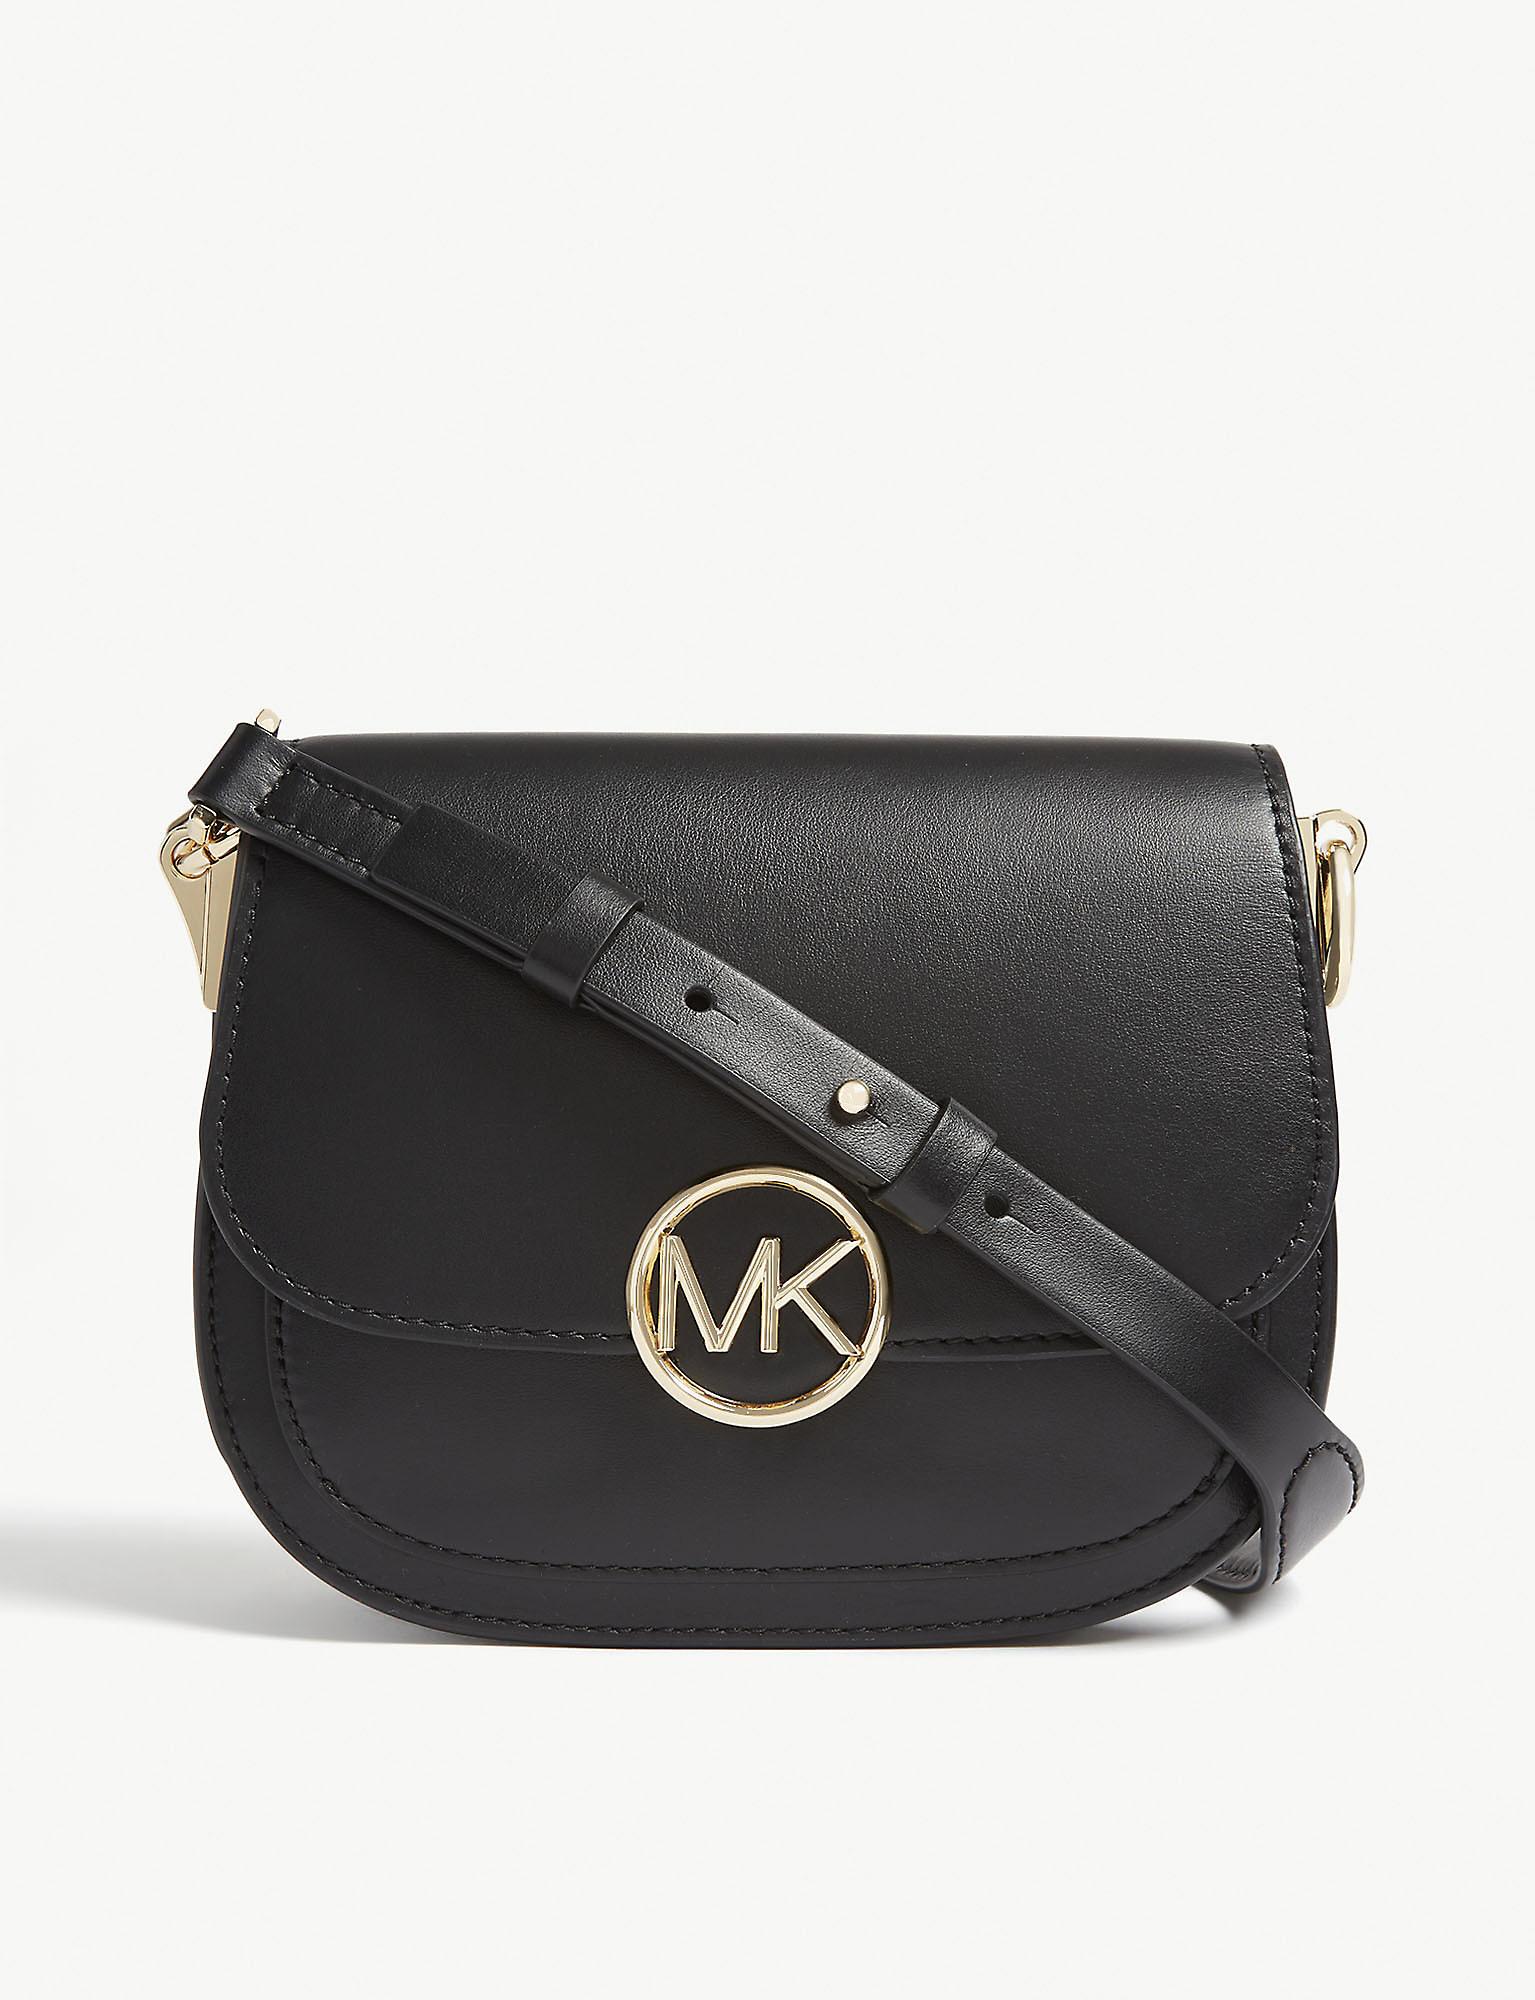 MICHAEL Michael Kors Lillie Small Leather Saddle Bag in Black - Lyst